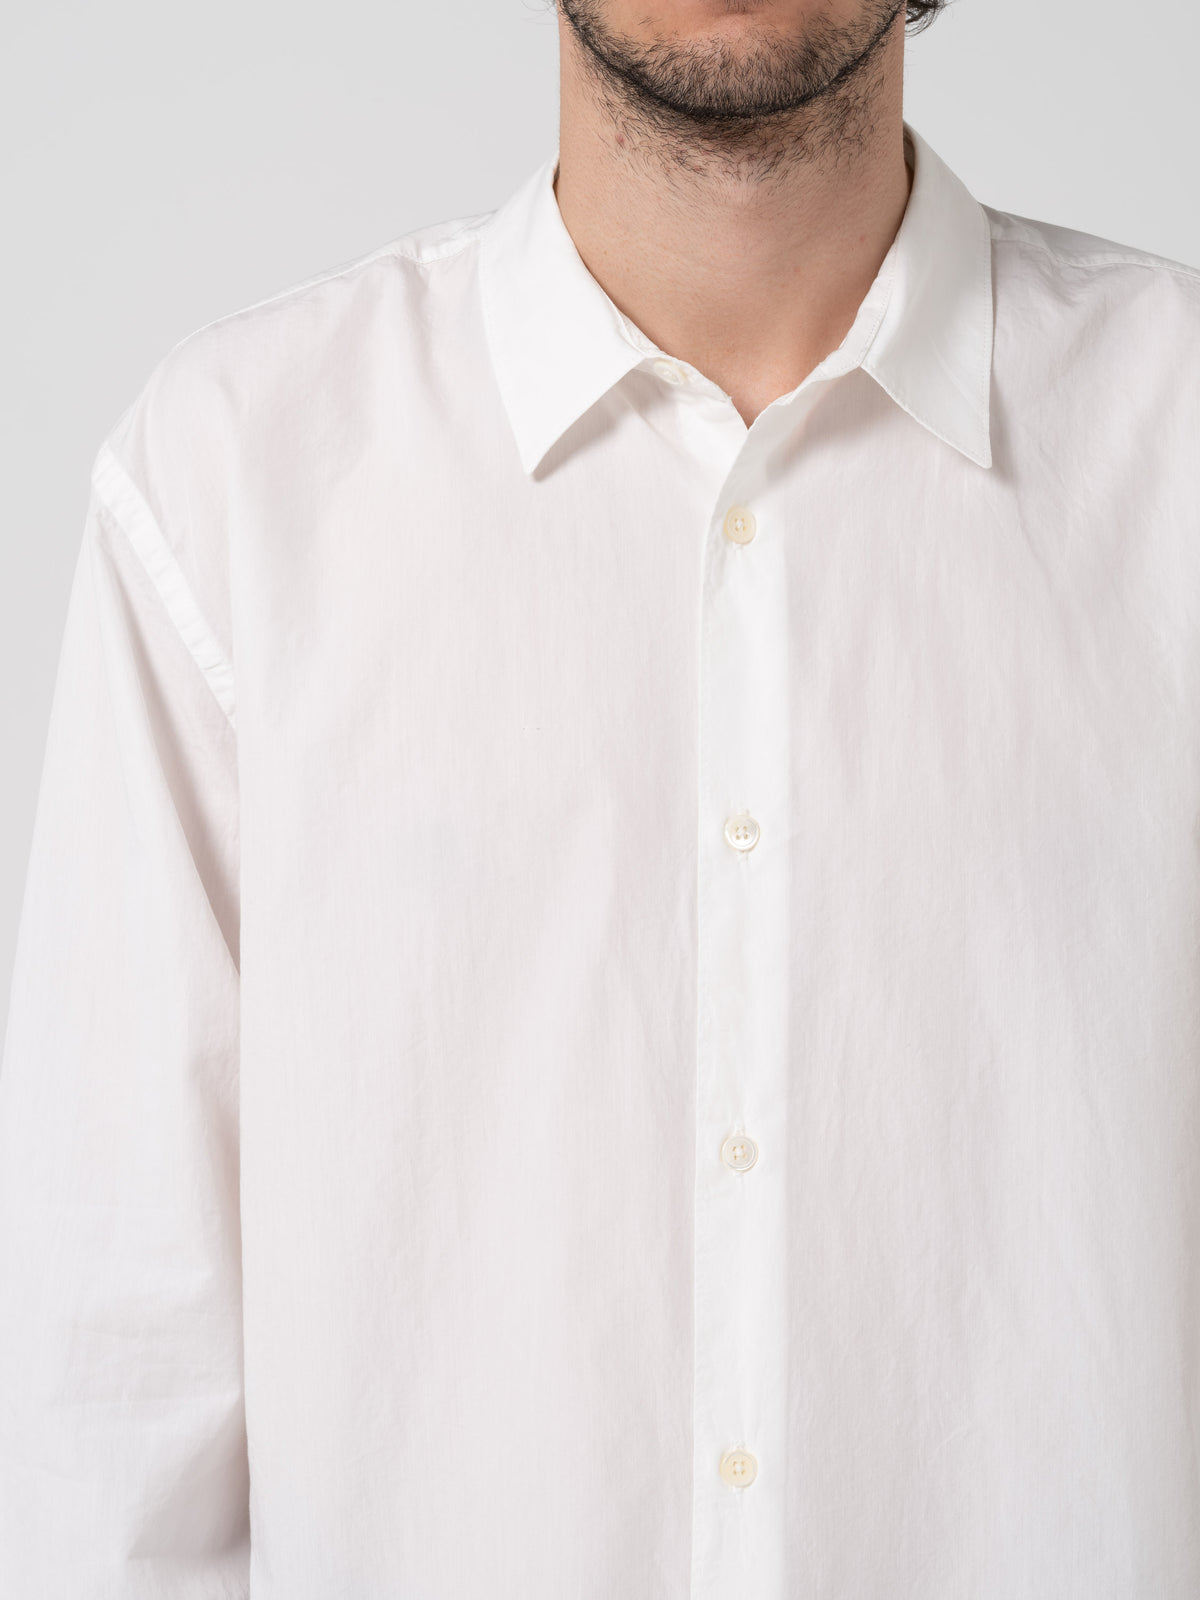 Chemise Formal, White Peached Cupro Poplin